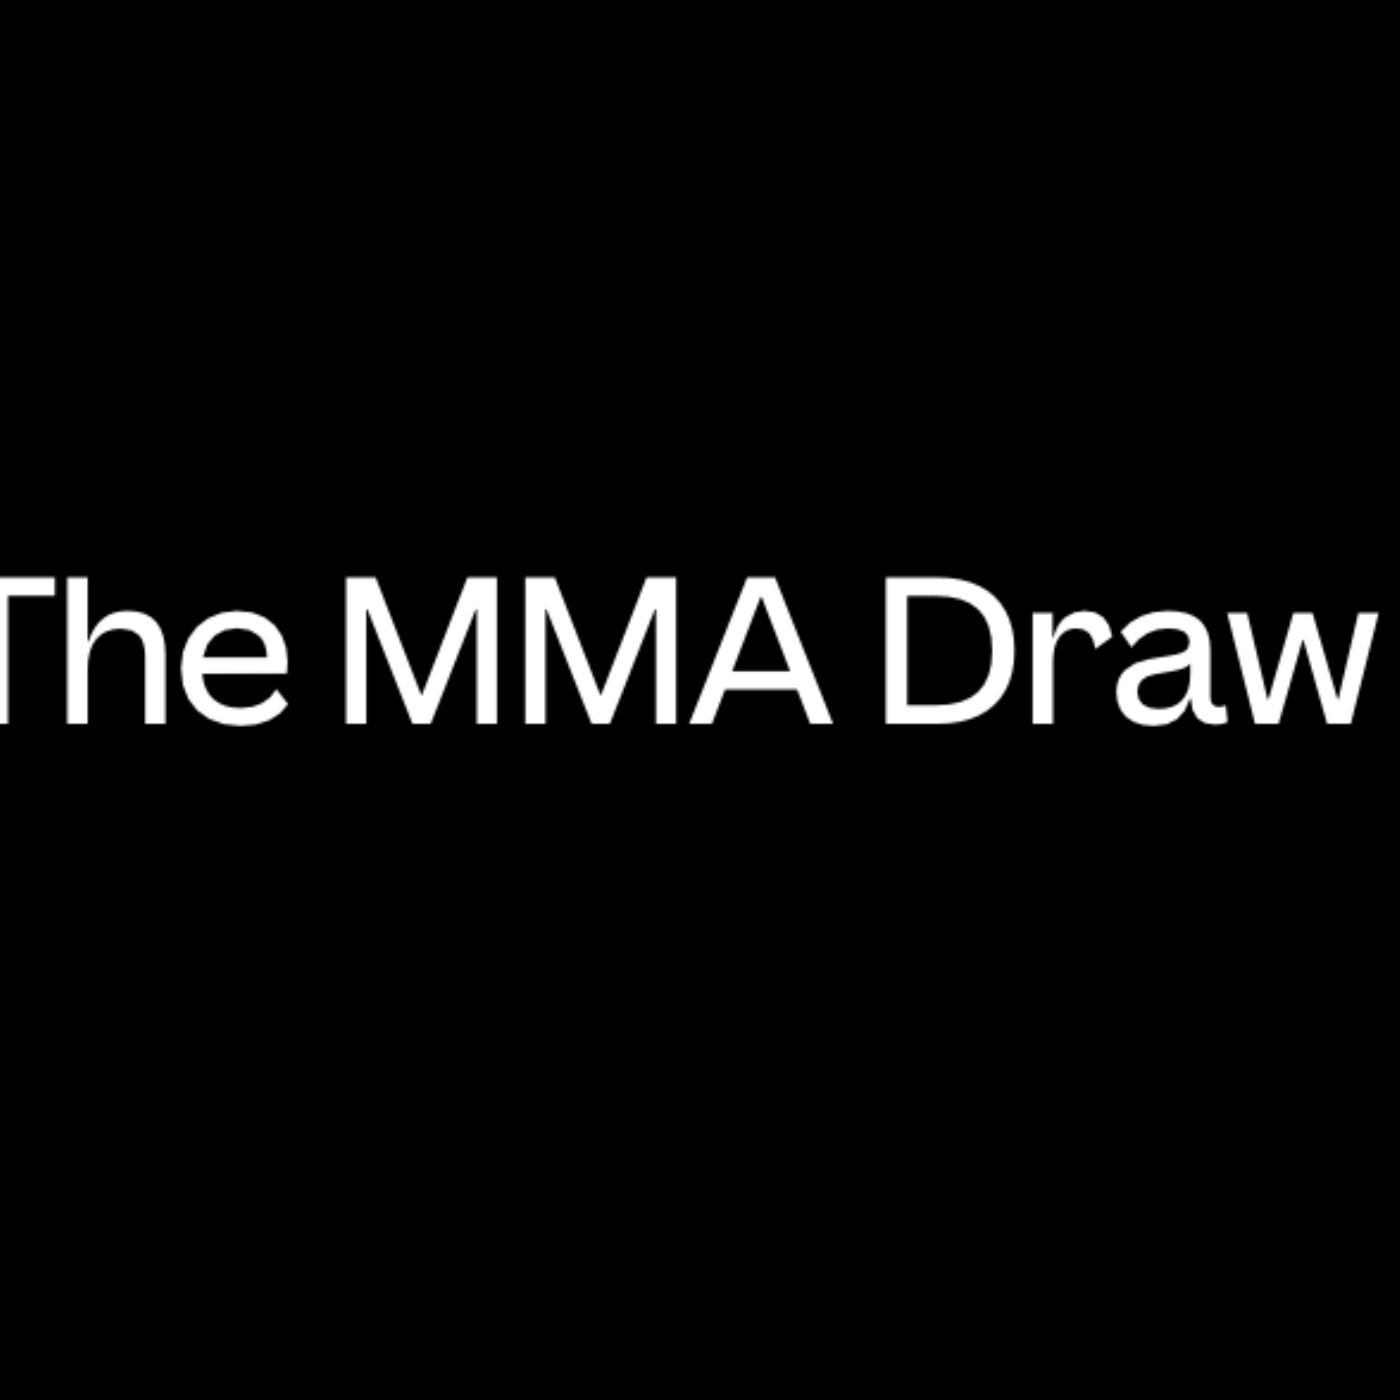 We have payout details for every UFC fight between 2011-2016